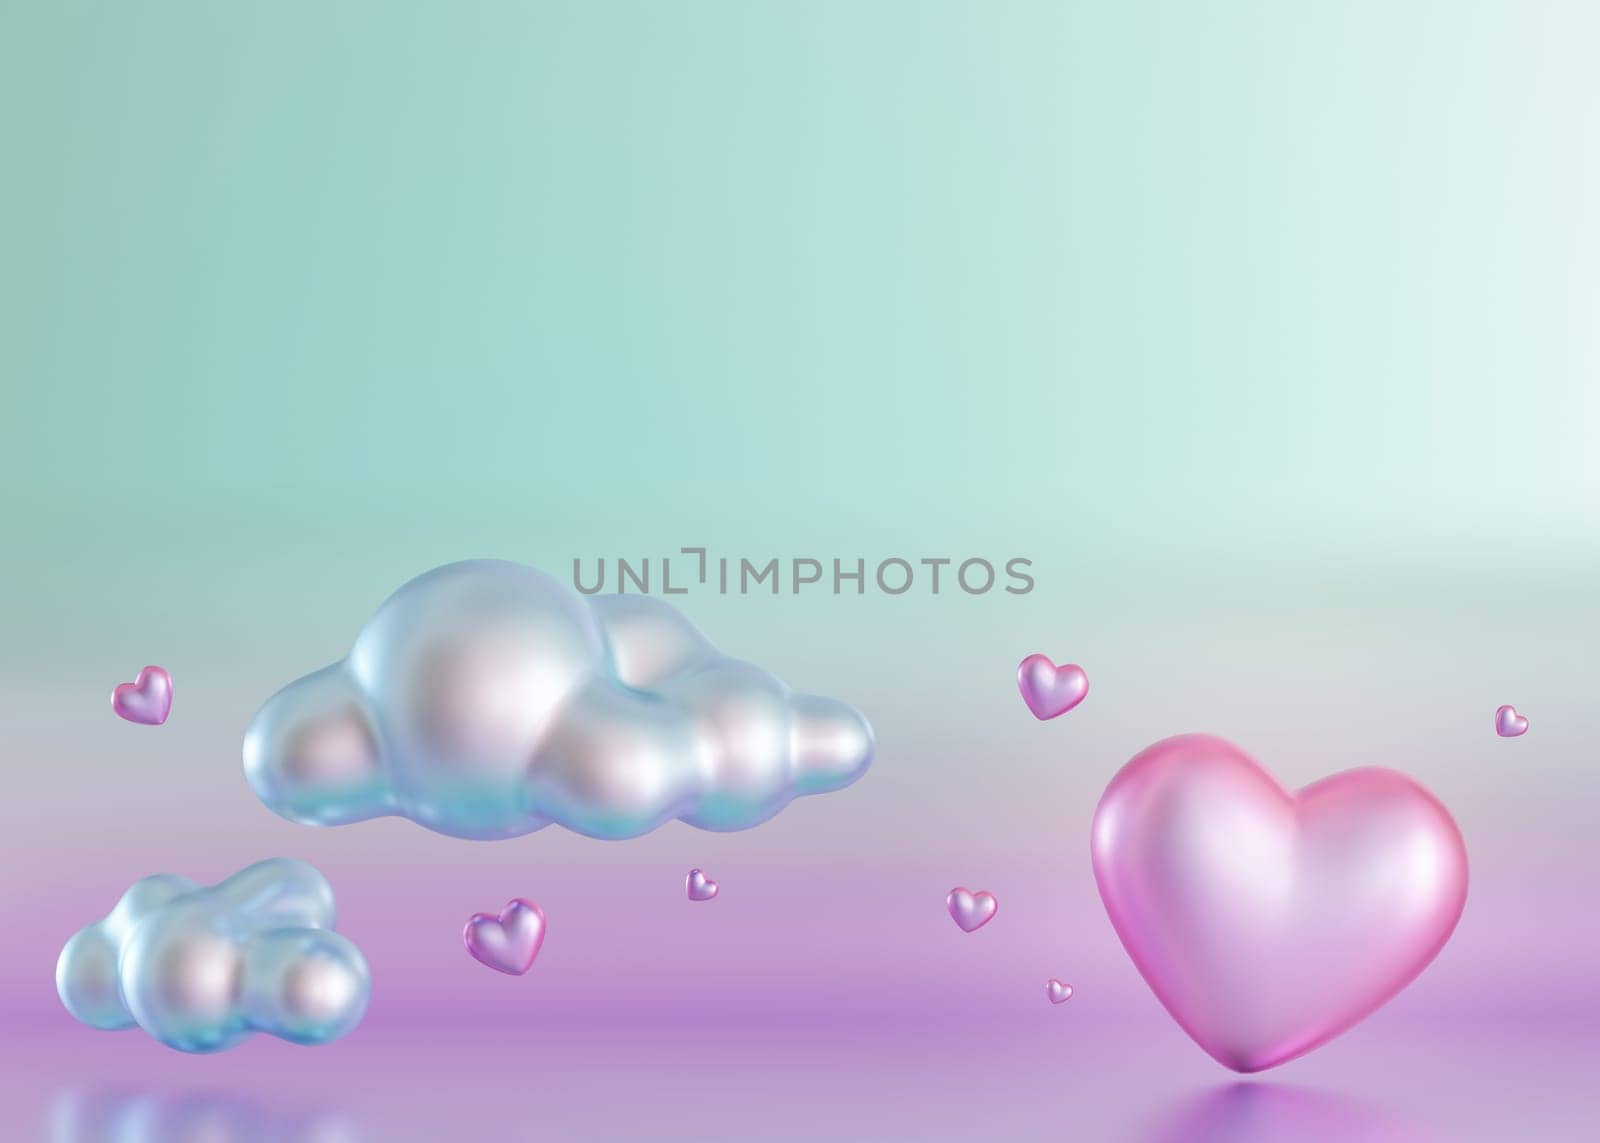 Surreal Y2K-style digital render featuring metallic clouds and floating hearts in a gradient of blue to violet, with ample copy space for text. 3D